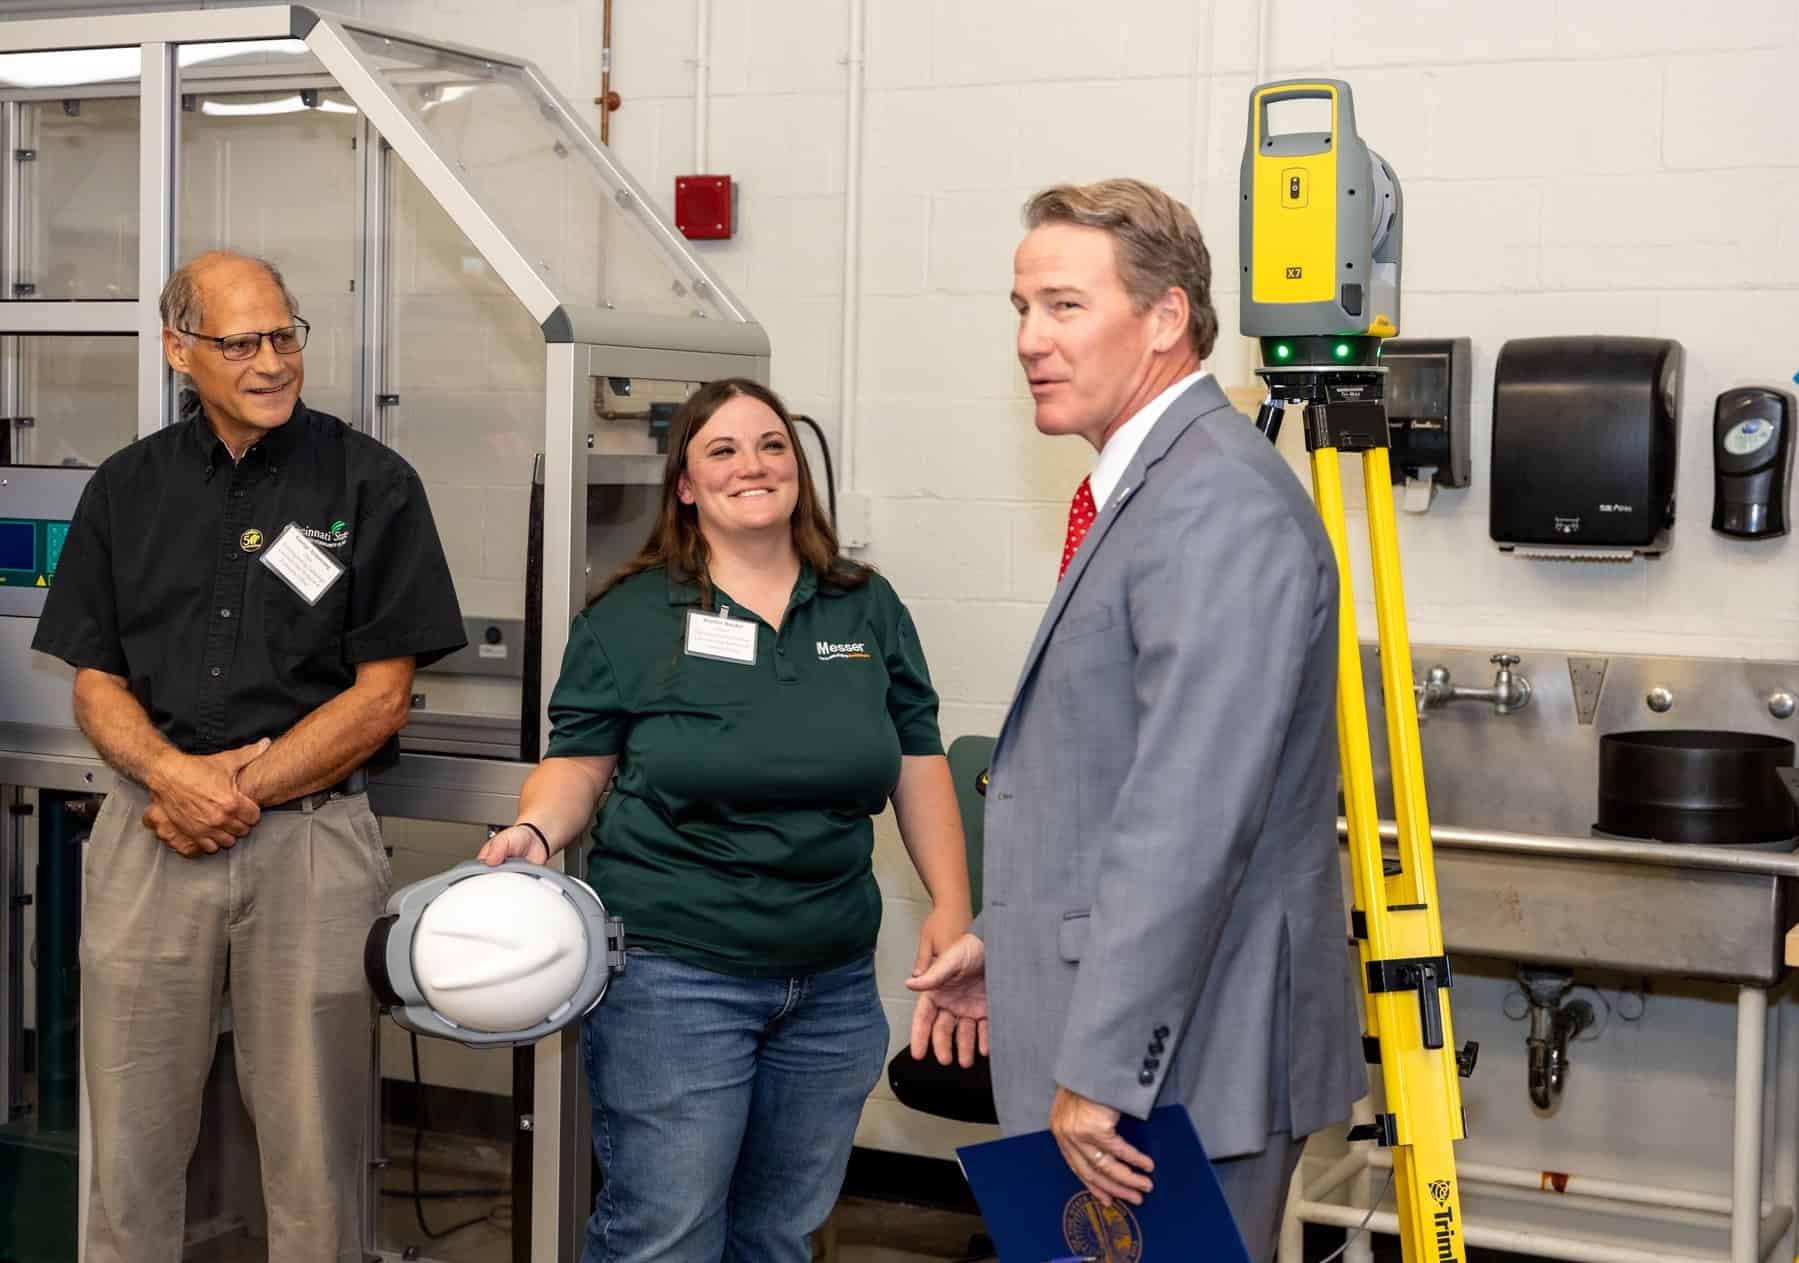 Professor George Armstrong and Construction Management student Heather Hayden explained new technology tools to Lt. Gov. Husted